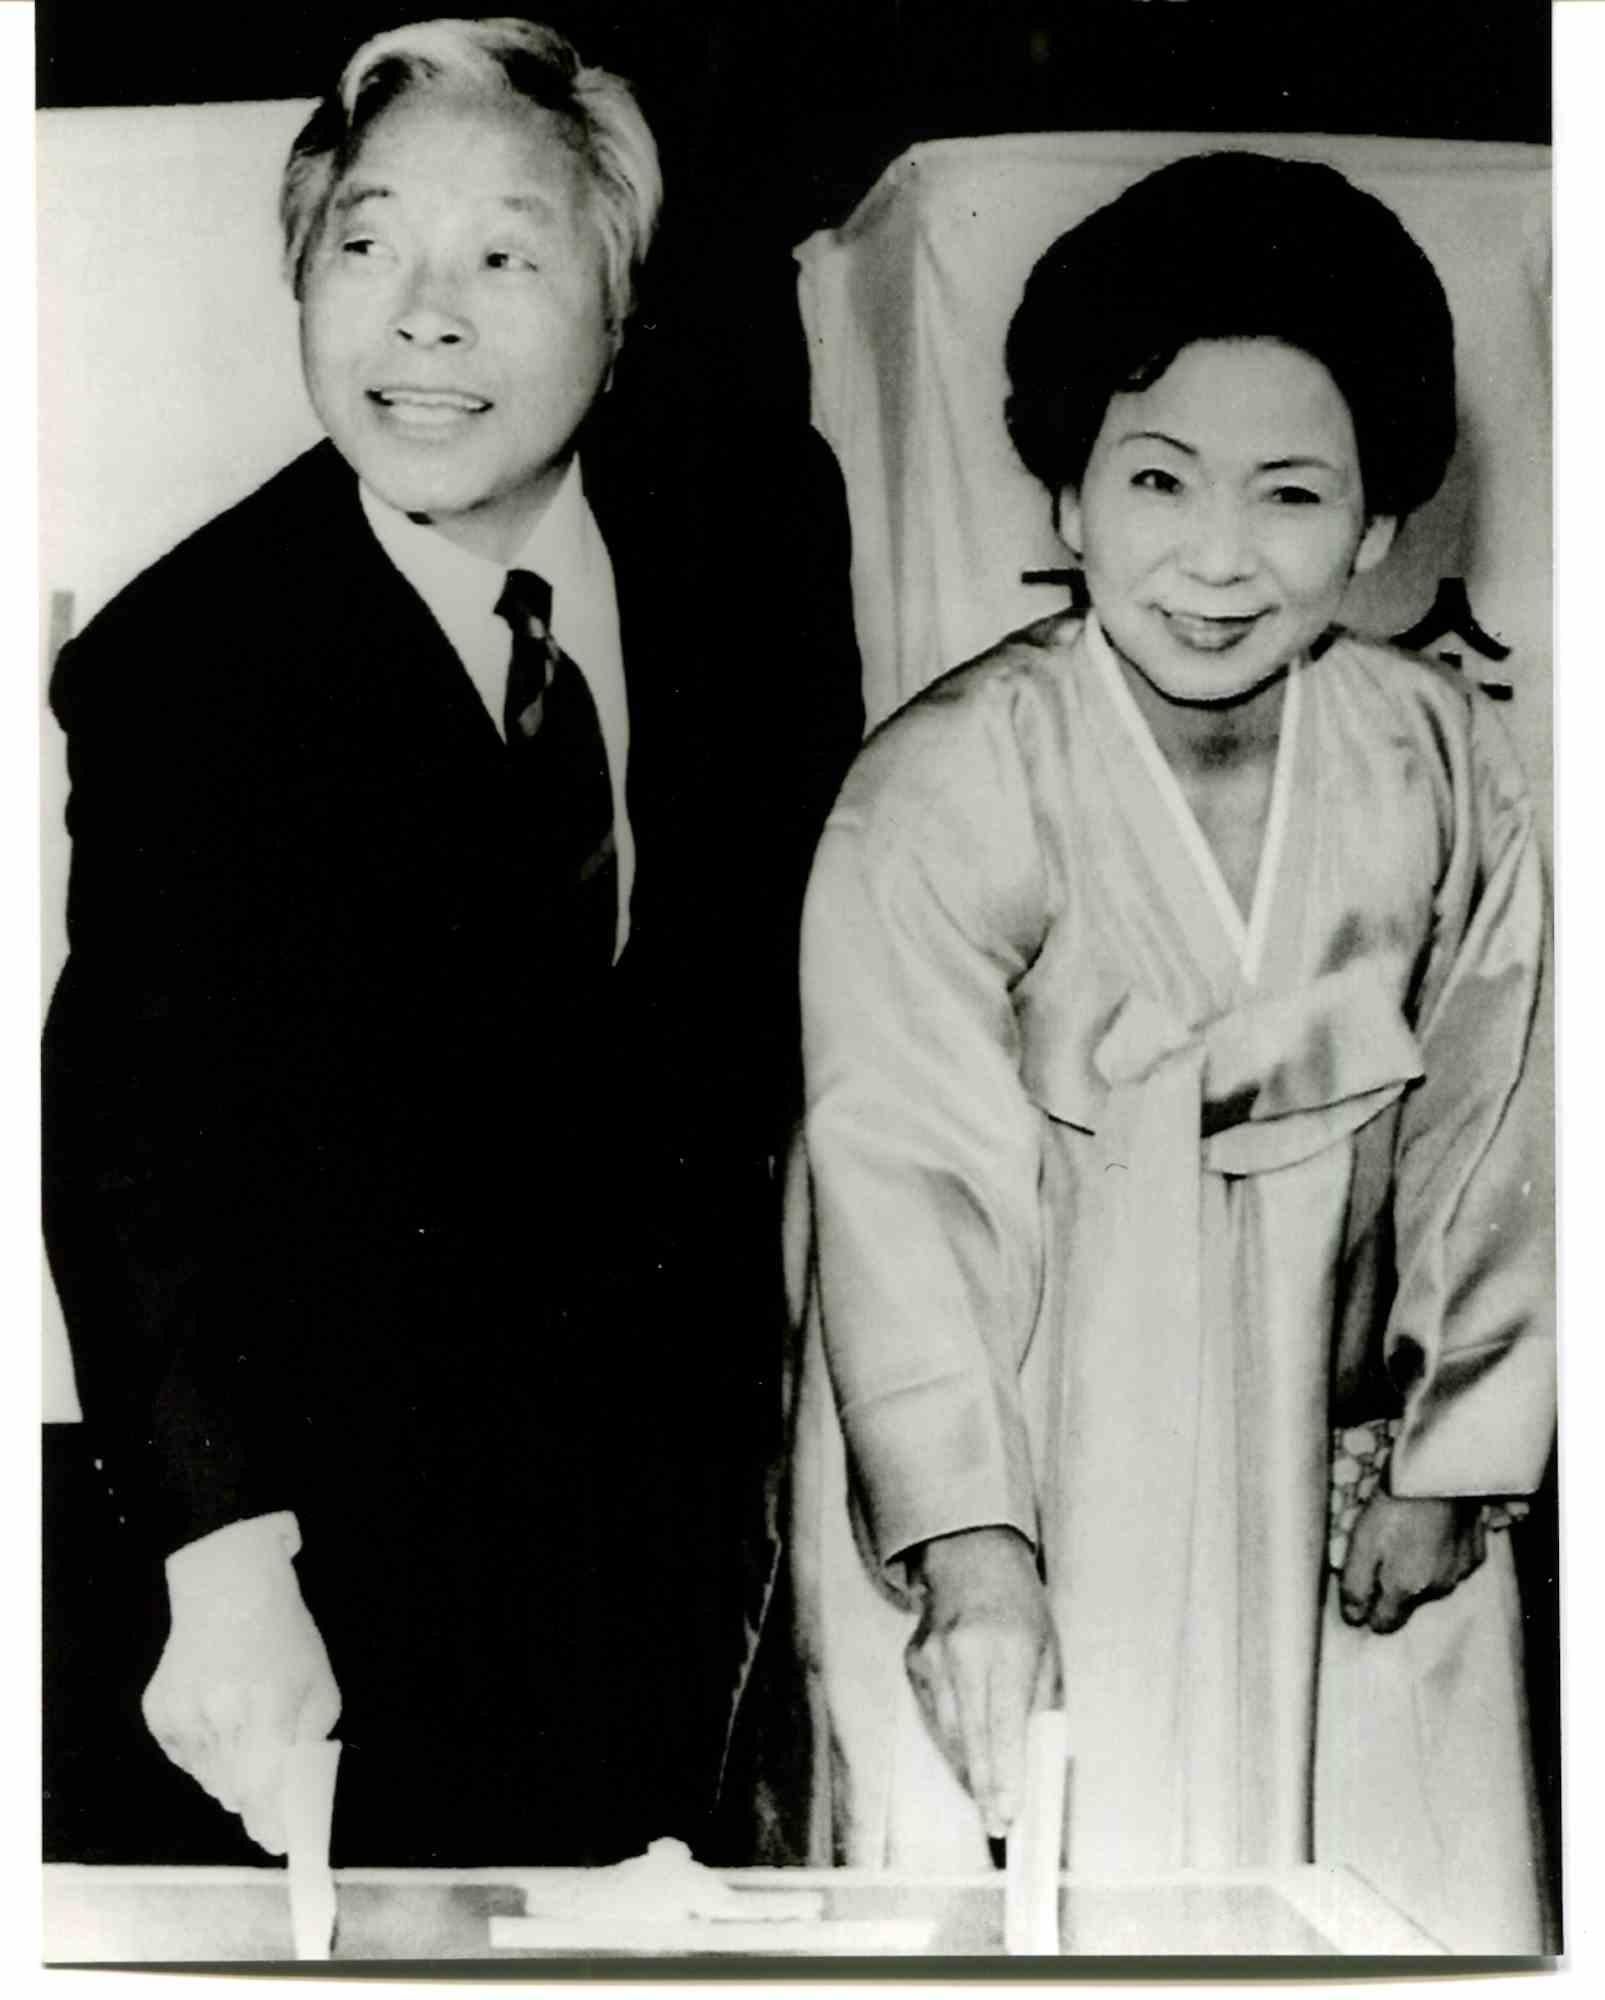 Unknown Figurative Photograph - The Photo of Kim Young sam and his Wife - 1987